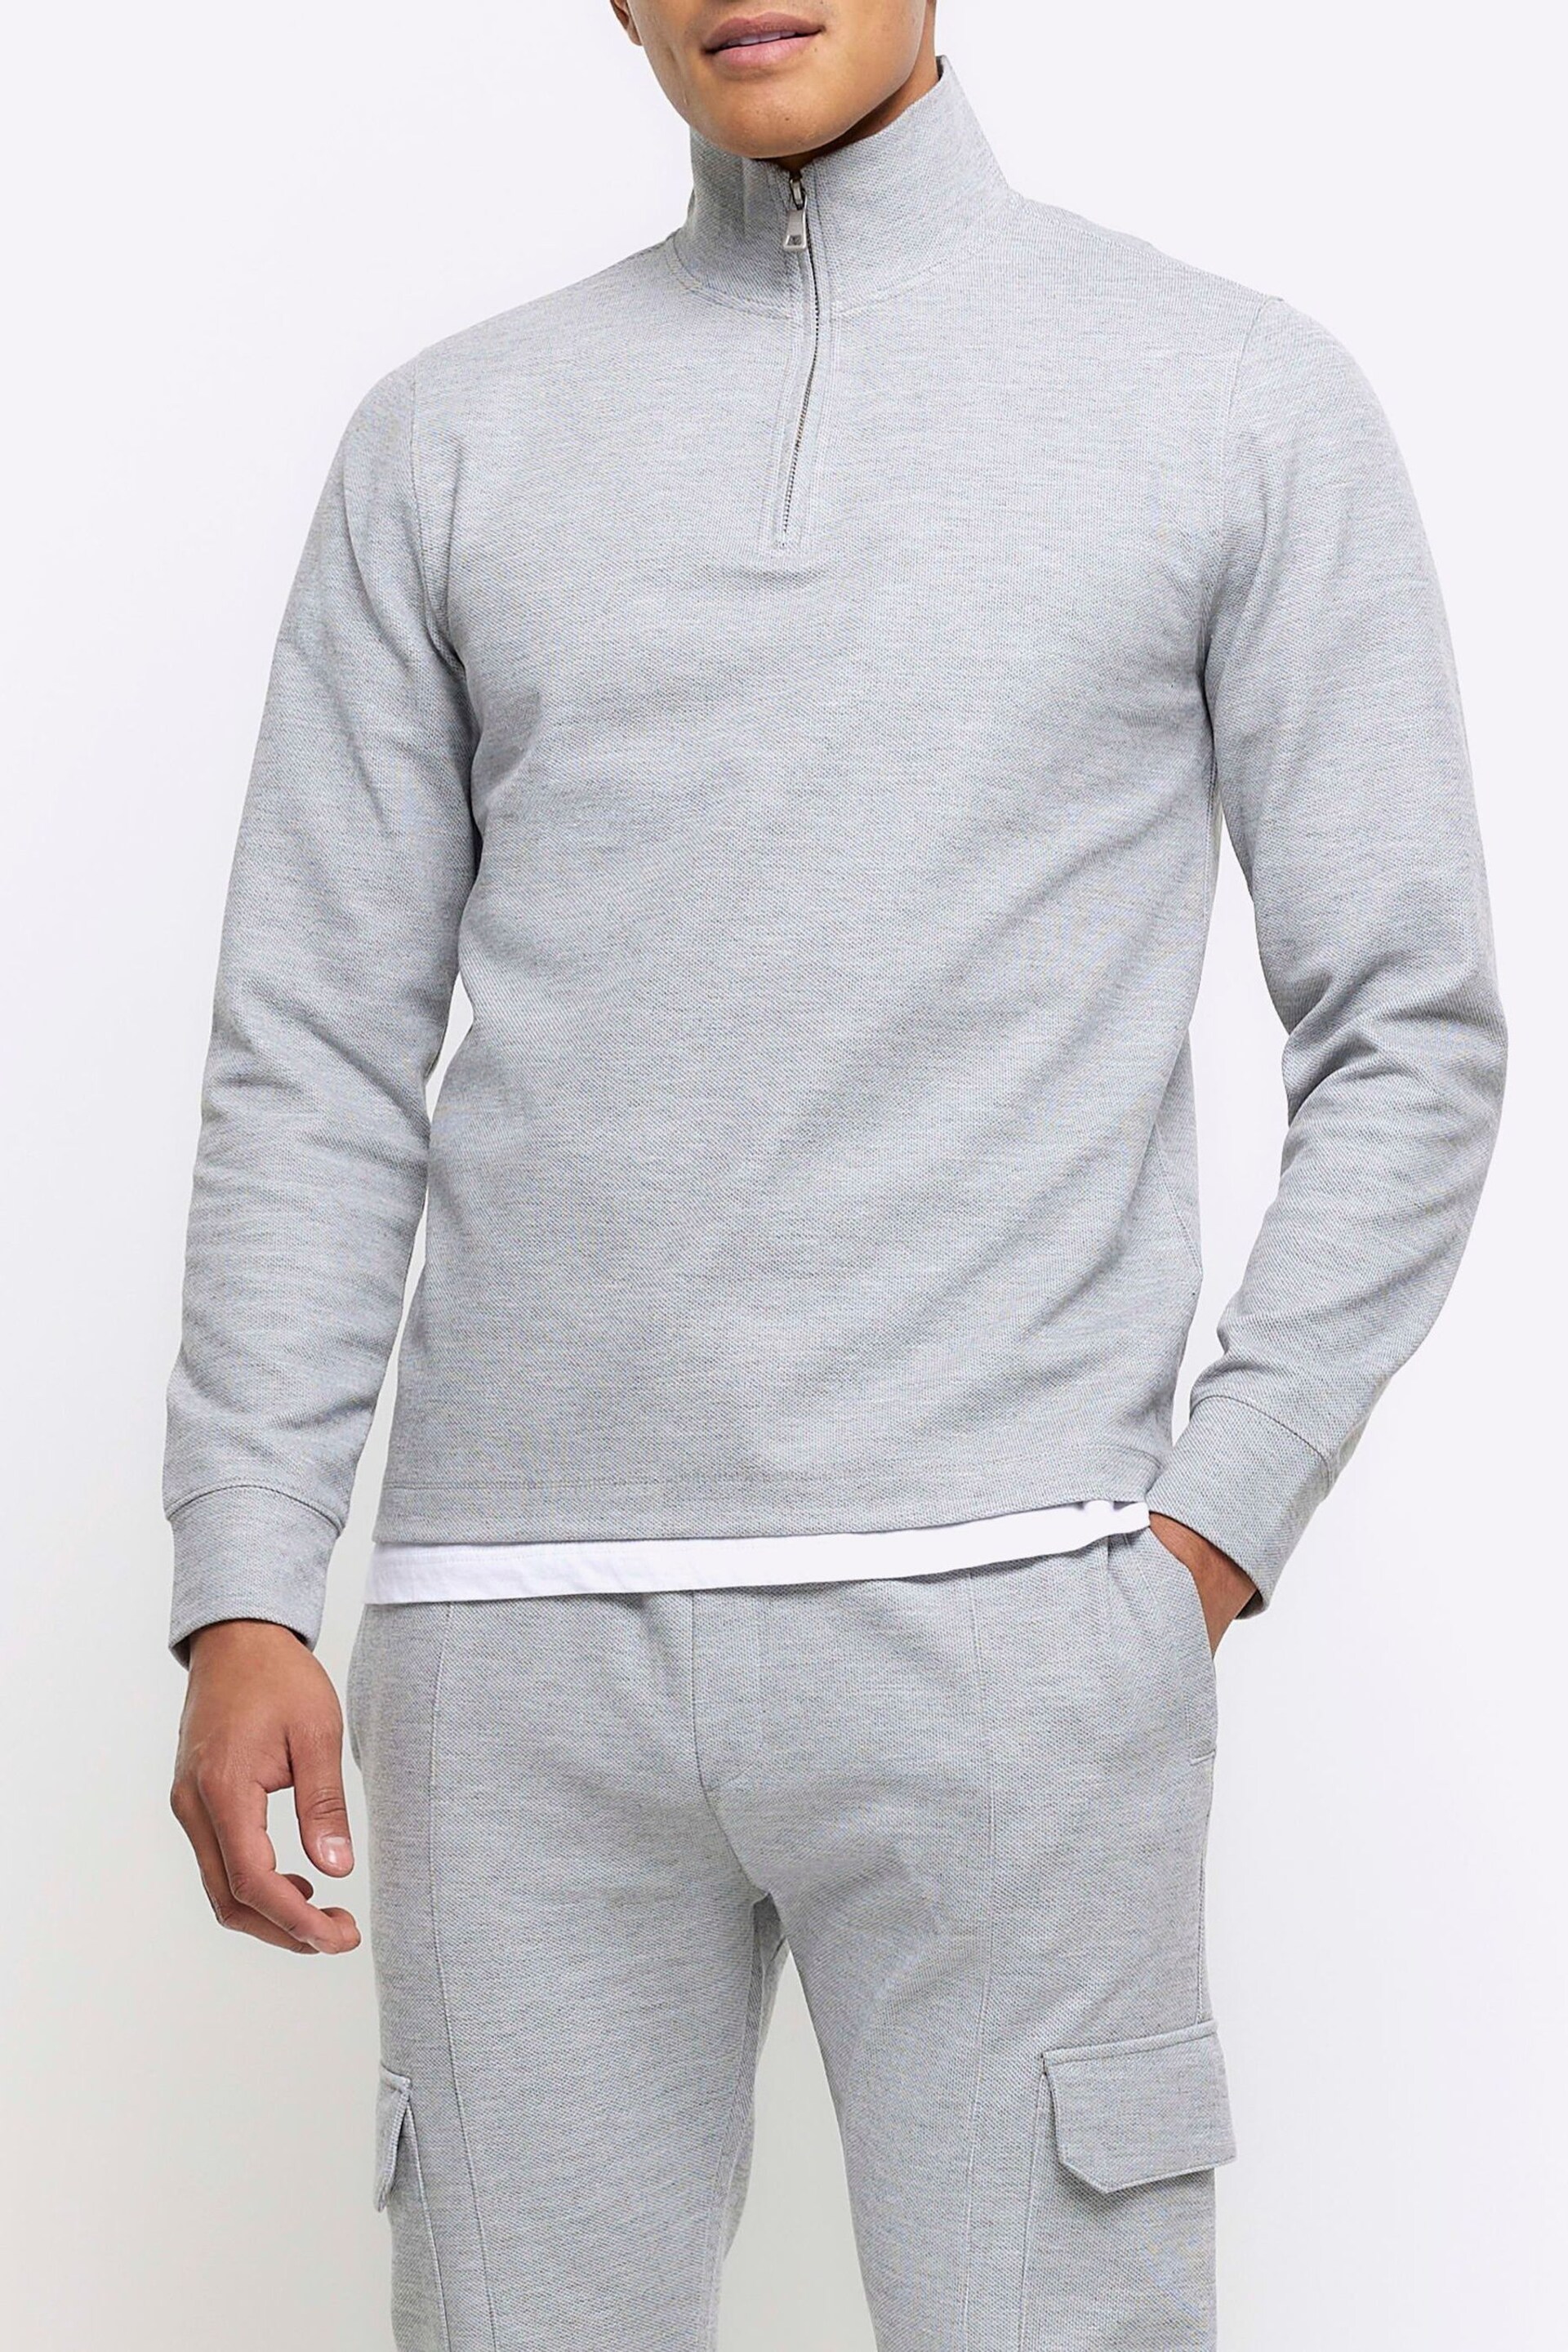 River Island Grey Slim Fit Textured Funnel Neck Sweat Shirt - Image 1 of 6